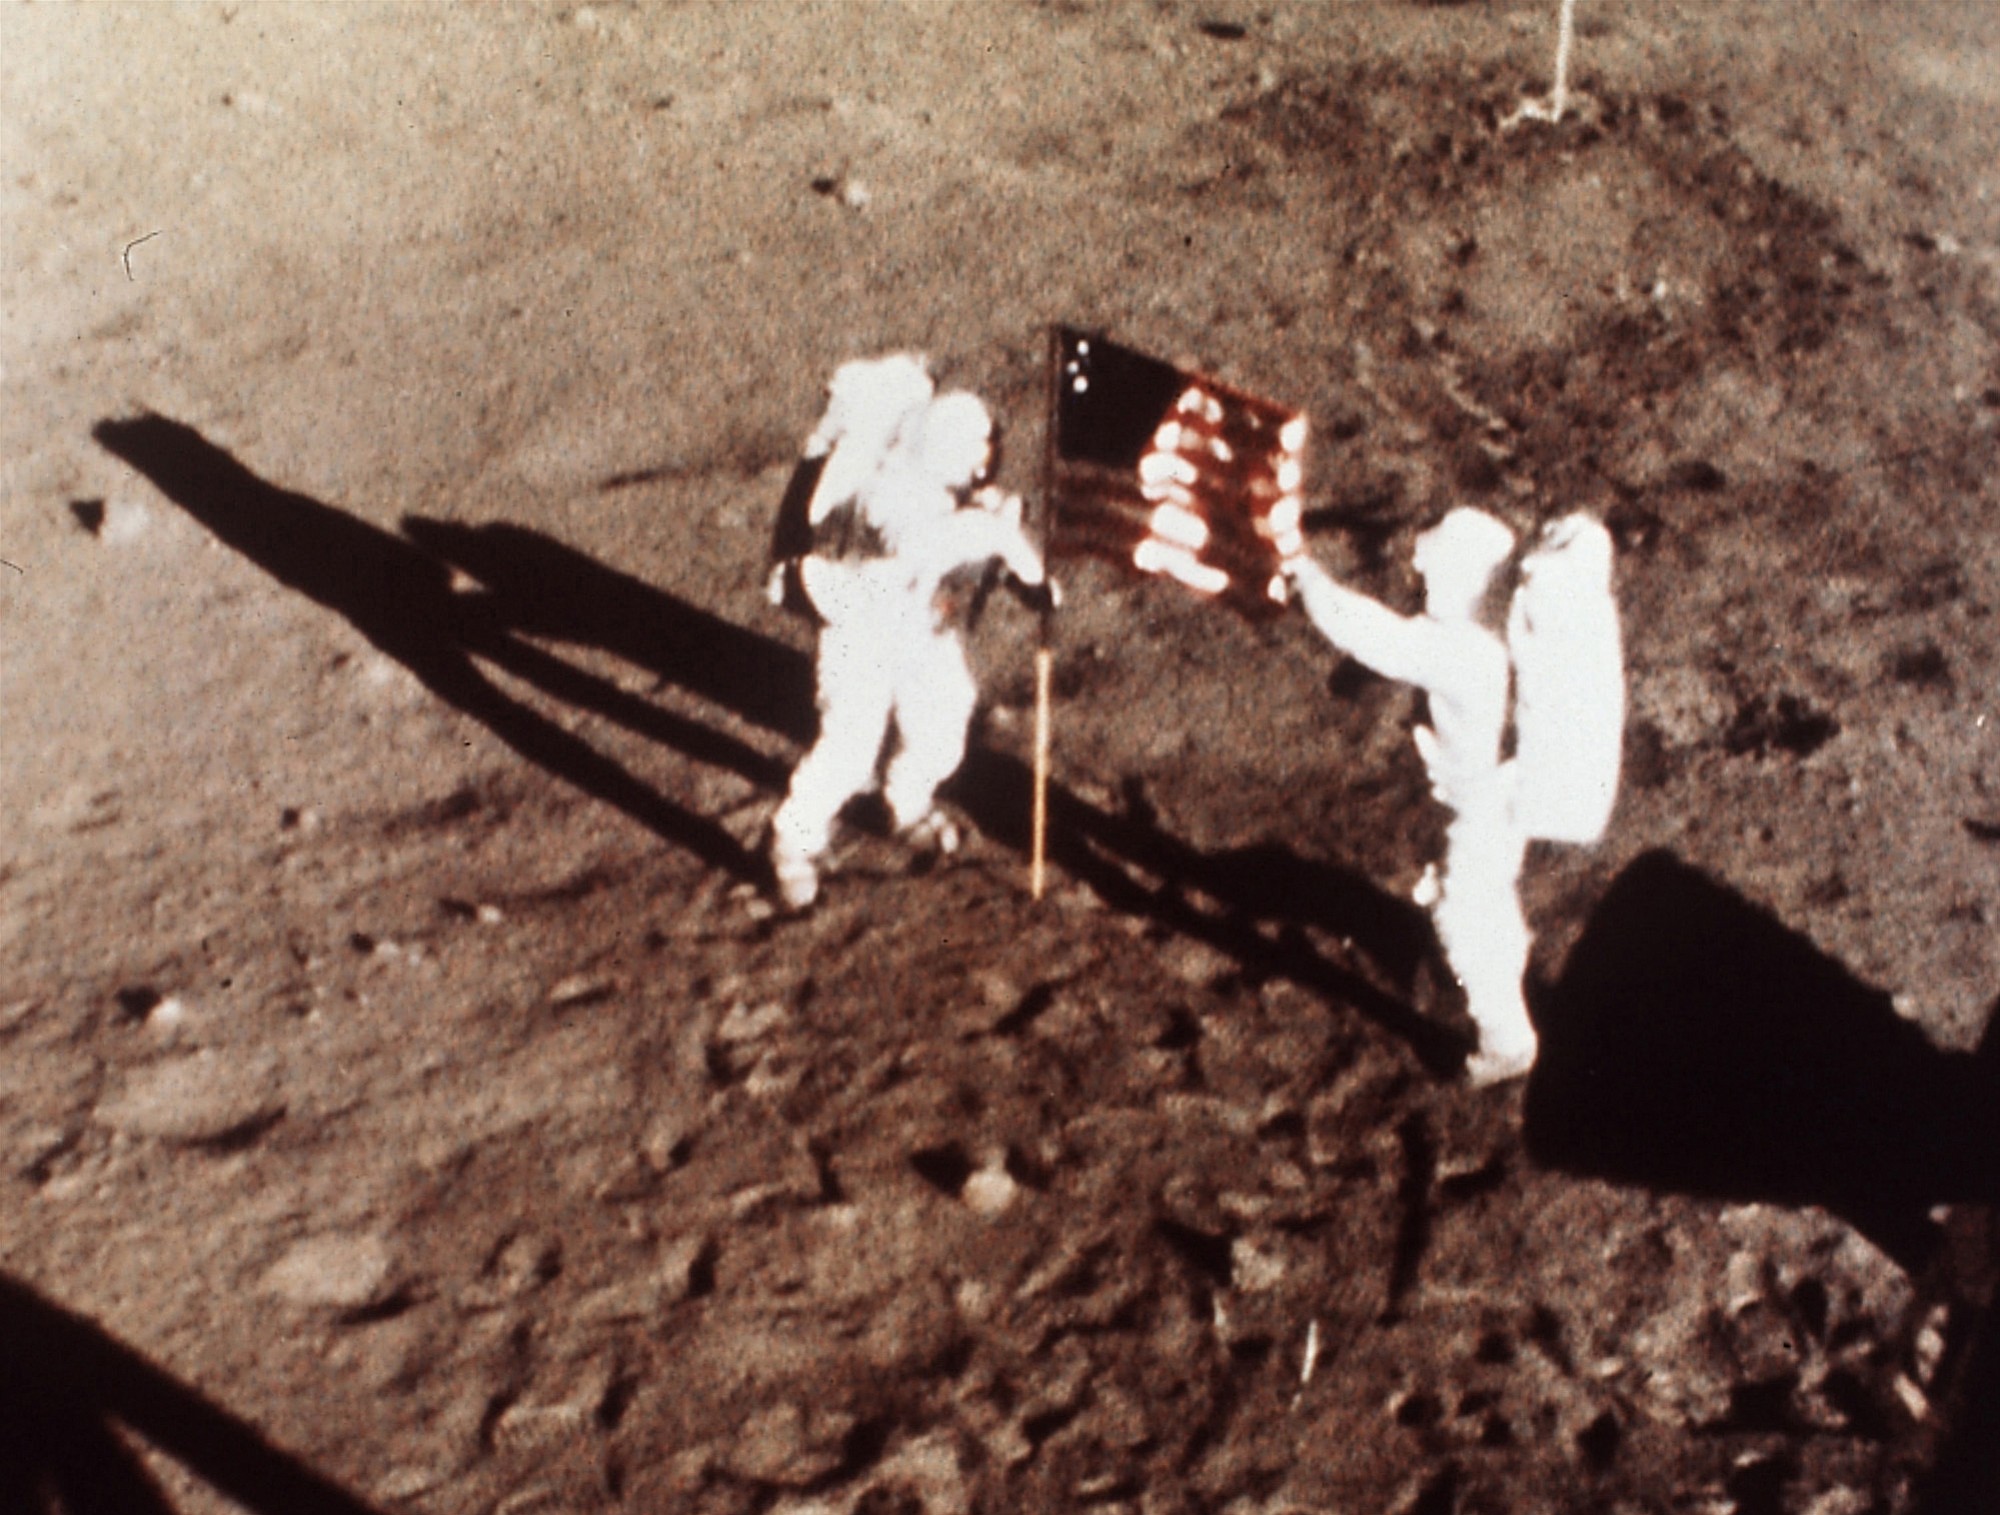 Apollo 11 astronauts Neil Armstrong and Edwin E. &quot;Buzz&quot; Aldrin, the first men to land on the moon, plant the U.S. flag on the lunar surface, July 20, 1969.